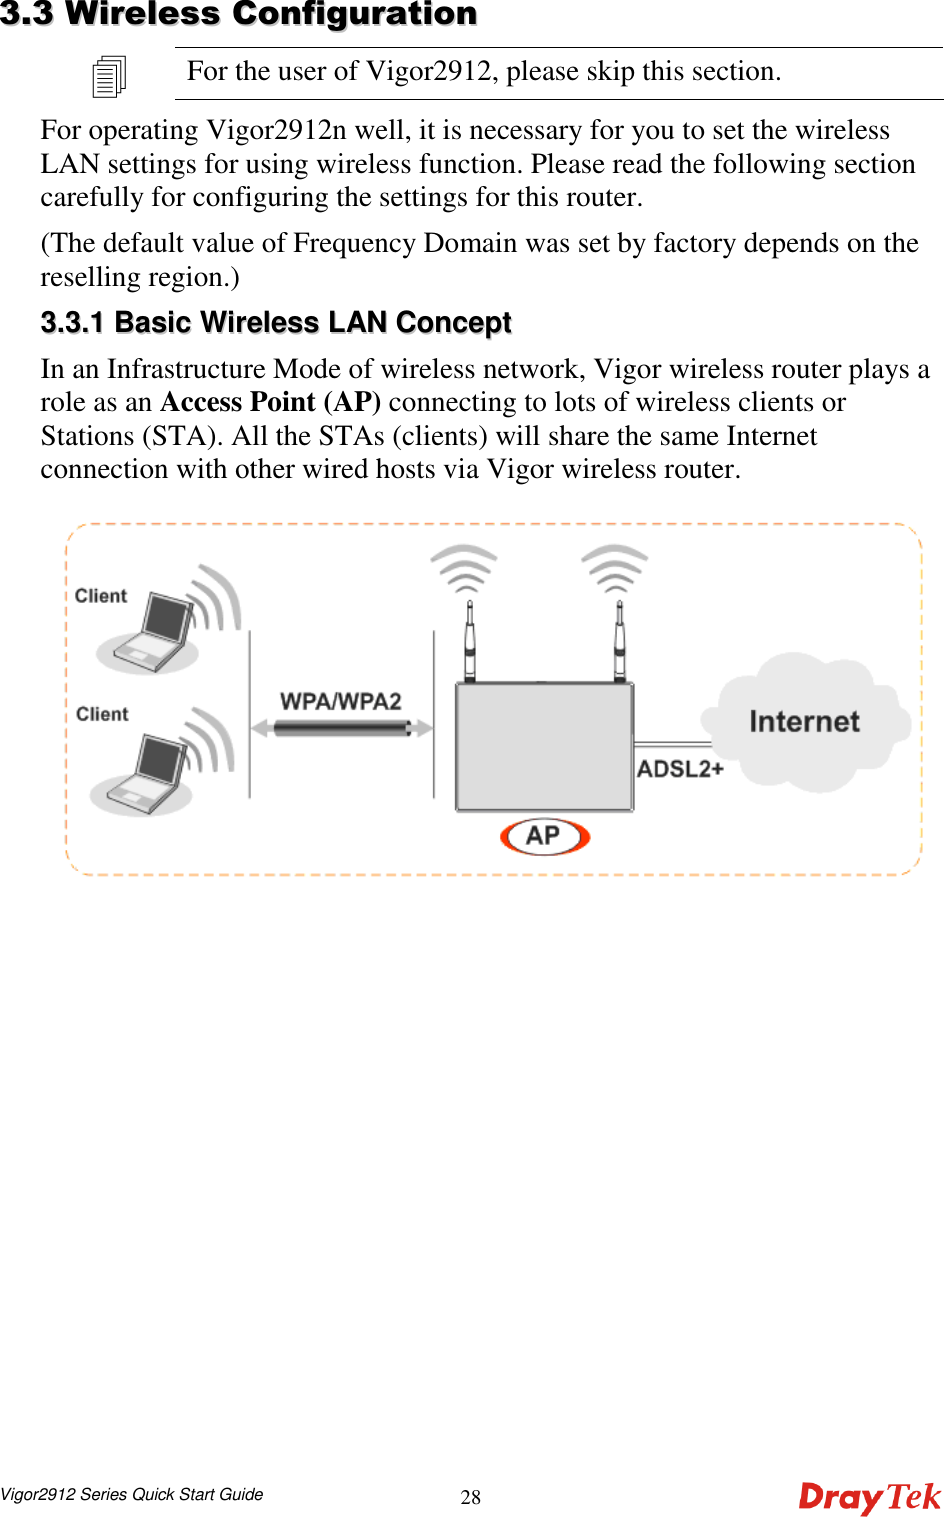  Vigor2912 Series Quick Start Guide 2833..33  WWiirreelleessss  CCoonnffiigguurraattiioonn   For the user of Vigor2912, please skip this section. For operating Vigor2912n well, it is necessary for you to set the wireless LAN settings for using wireless function. Please read the following section carefully for configuring the settings for this router. (The default value of Frequency Domain was set by factory depends on the reselling region.) 33..33..11  BBaassiicc  WWiirreelleessss  LLAANN  CCoonncceepptt  In an Infrastructure Mode of wireless network, Vigor wireless router plays a role as an Access Point (AP) connecting to lots of wireless clients or Stations (STA). All the STAs (clients) will share the same Internet connection with other wired hosts via Vigor wireless router.  